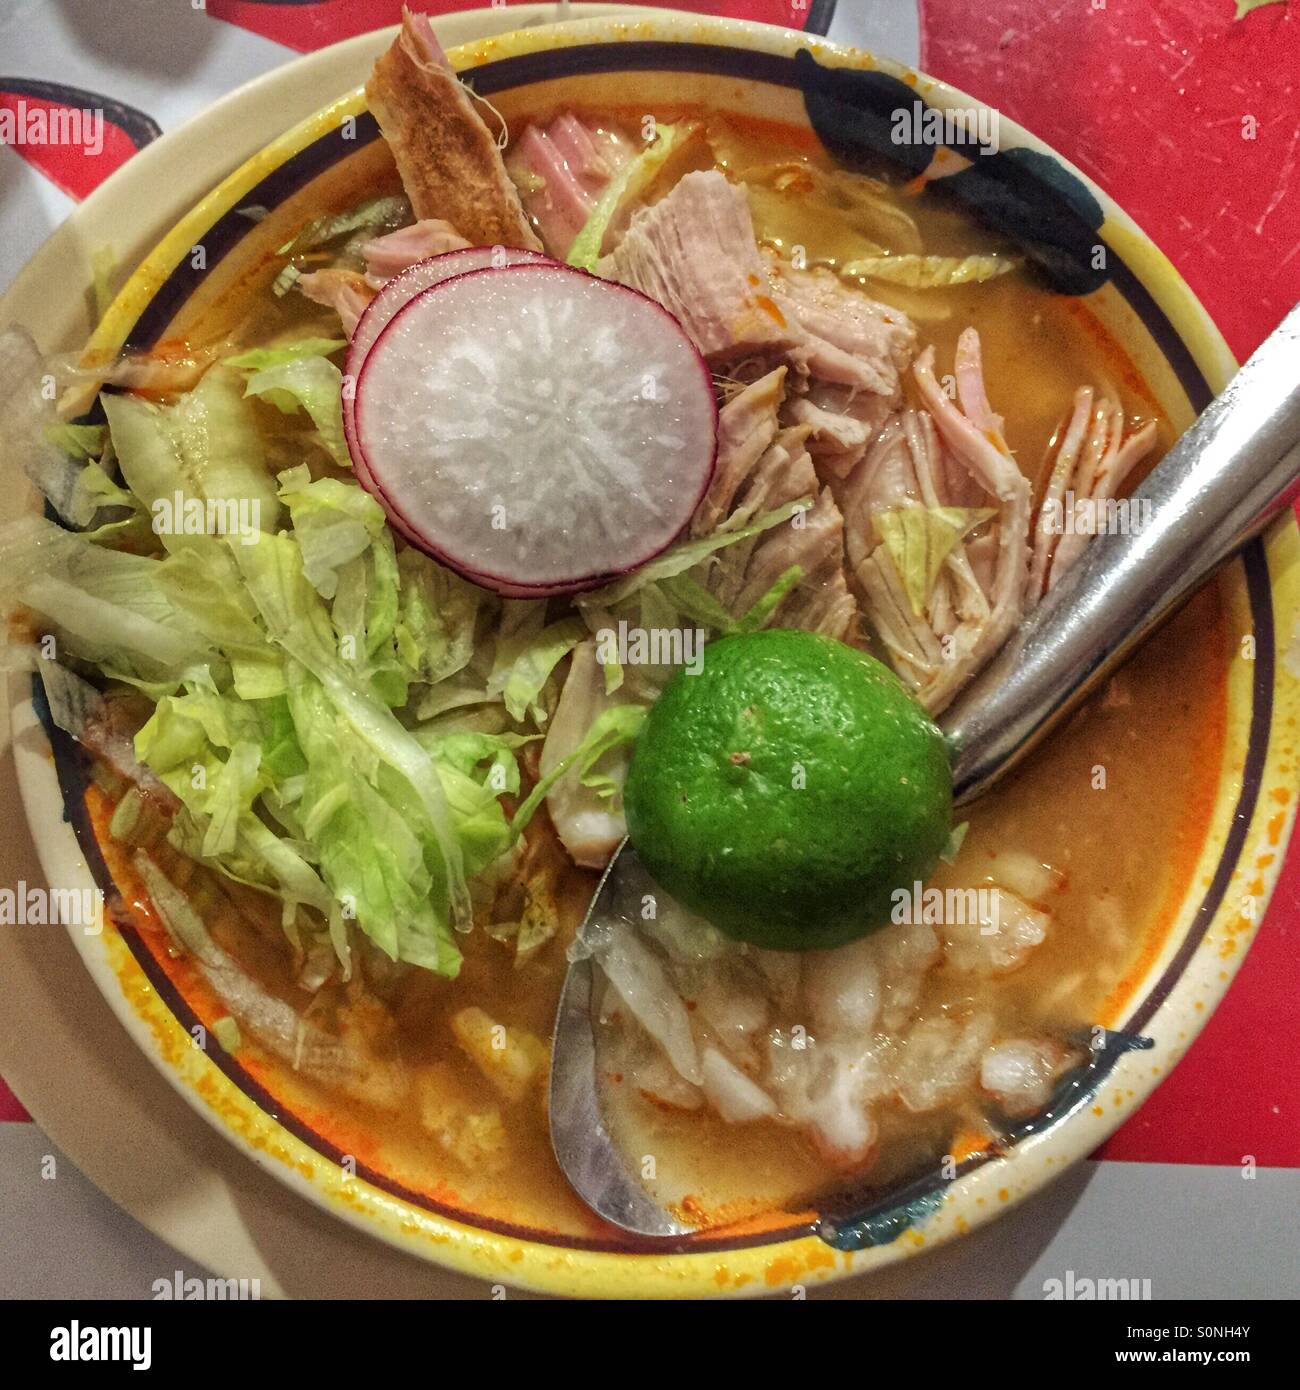 A delicious bowl of Pozole is topped with a lime and slices of radish. Stock Photo